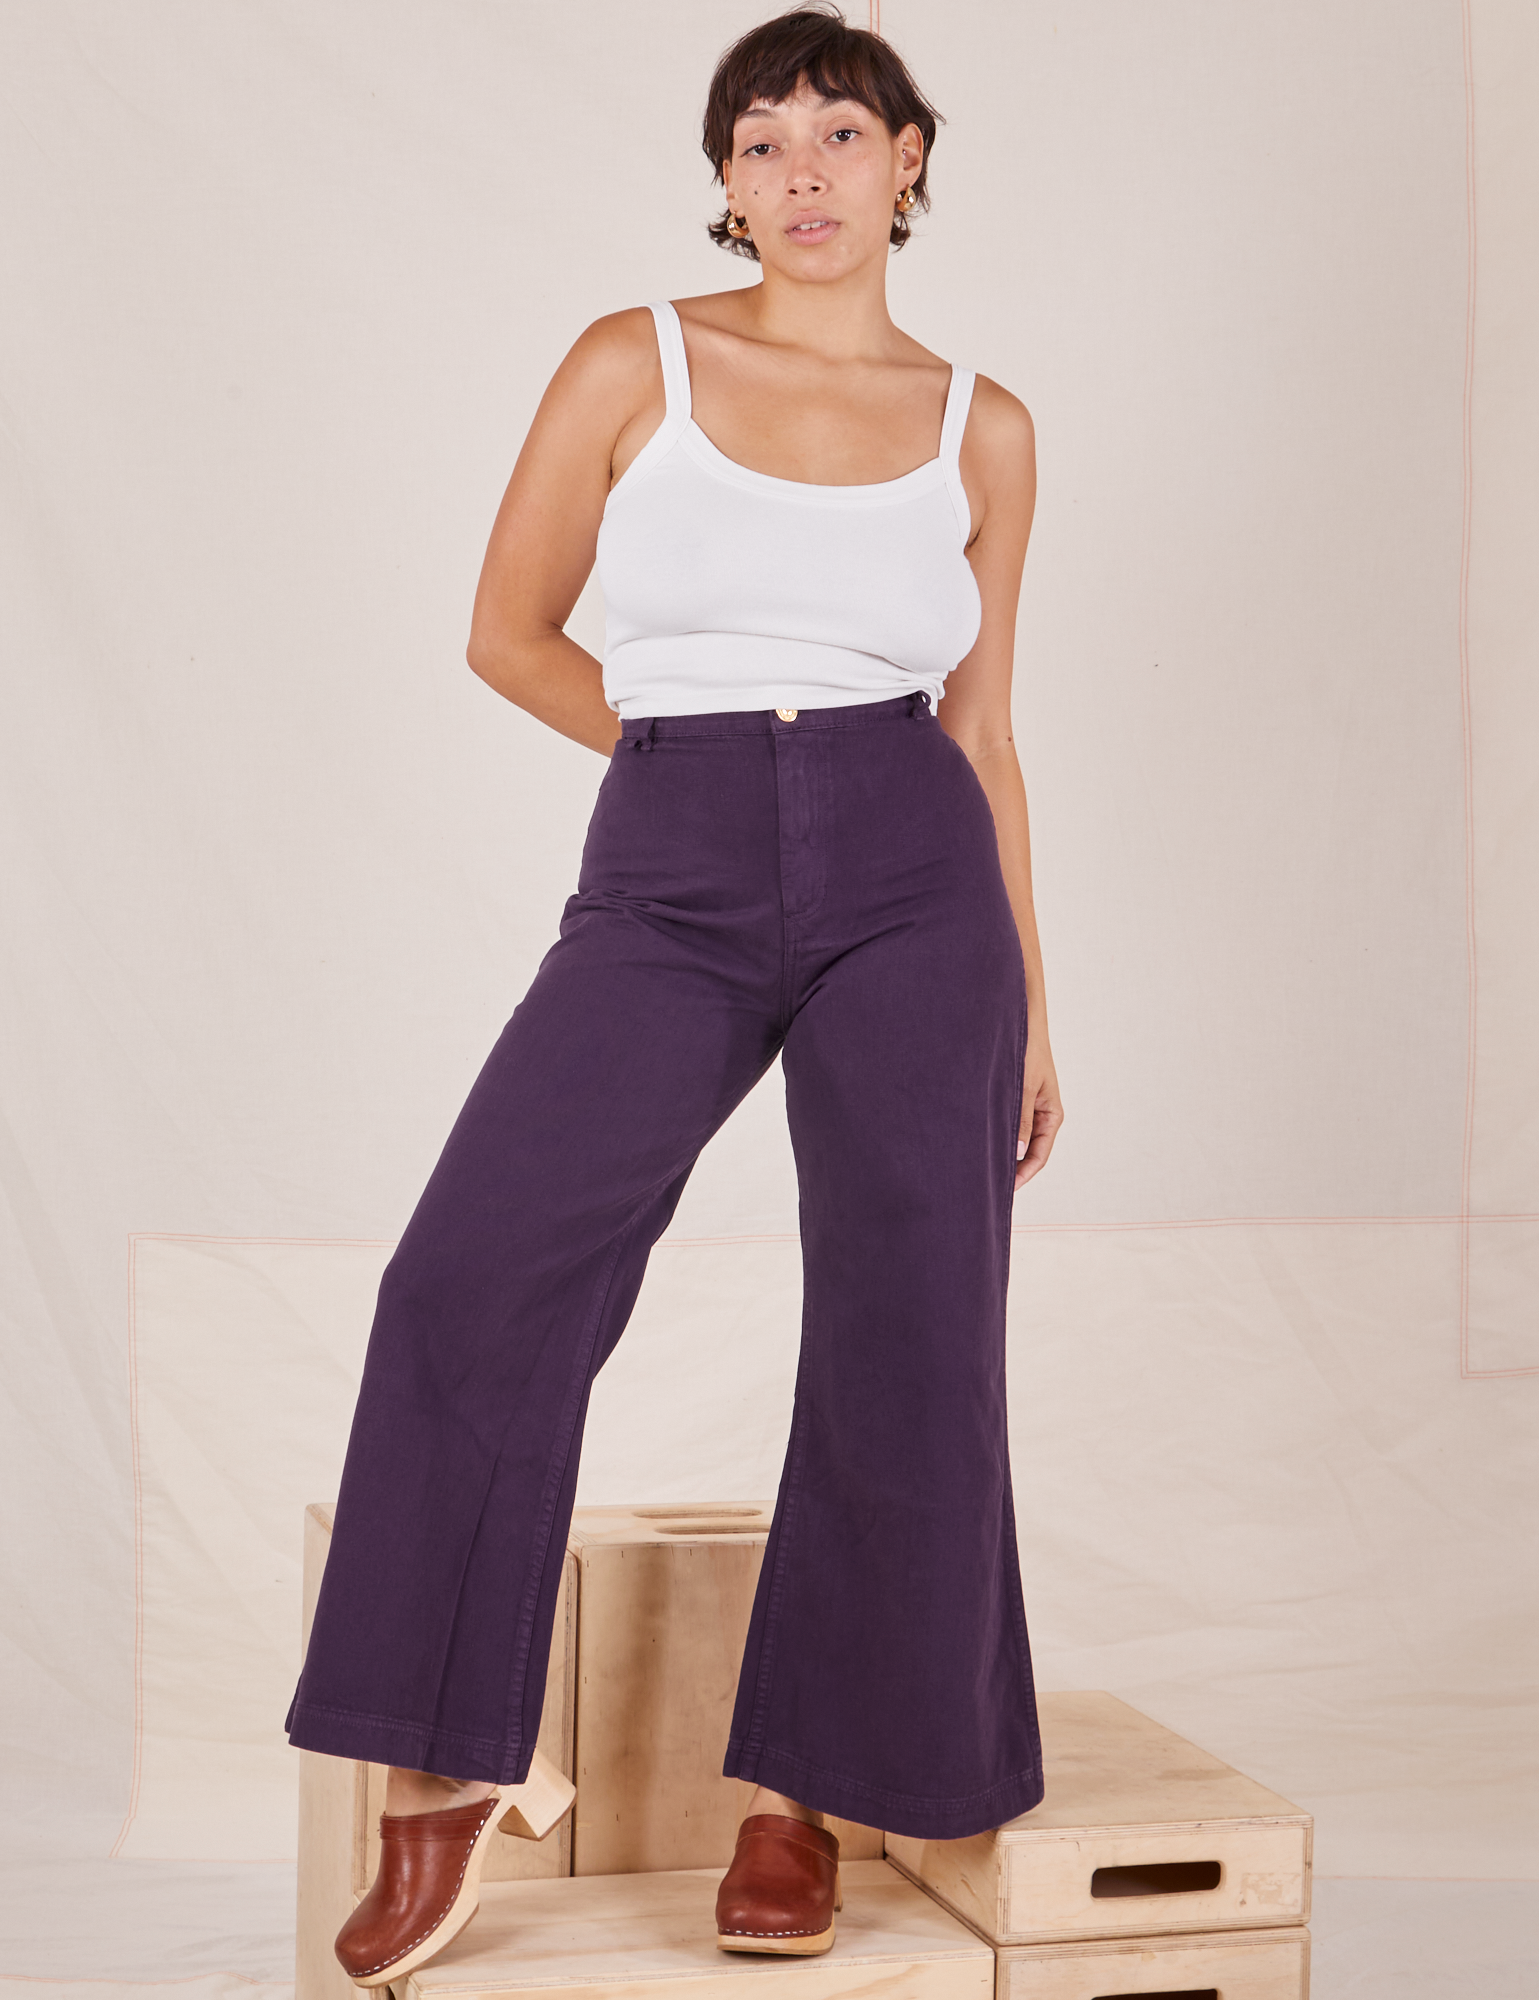 Tiara is 5&#39;4&quot; and wearing XS Bell Bottoms in Nebula Purple paired with Cropped Cami in vintage tee off-white